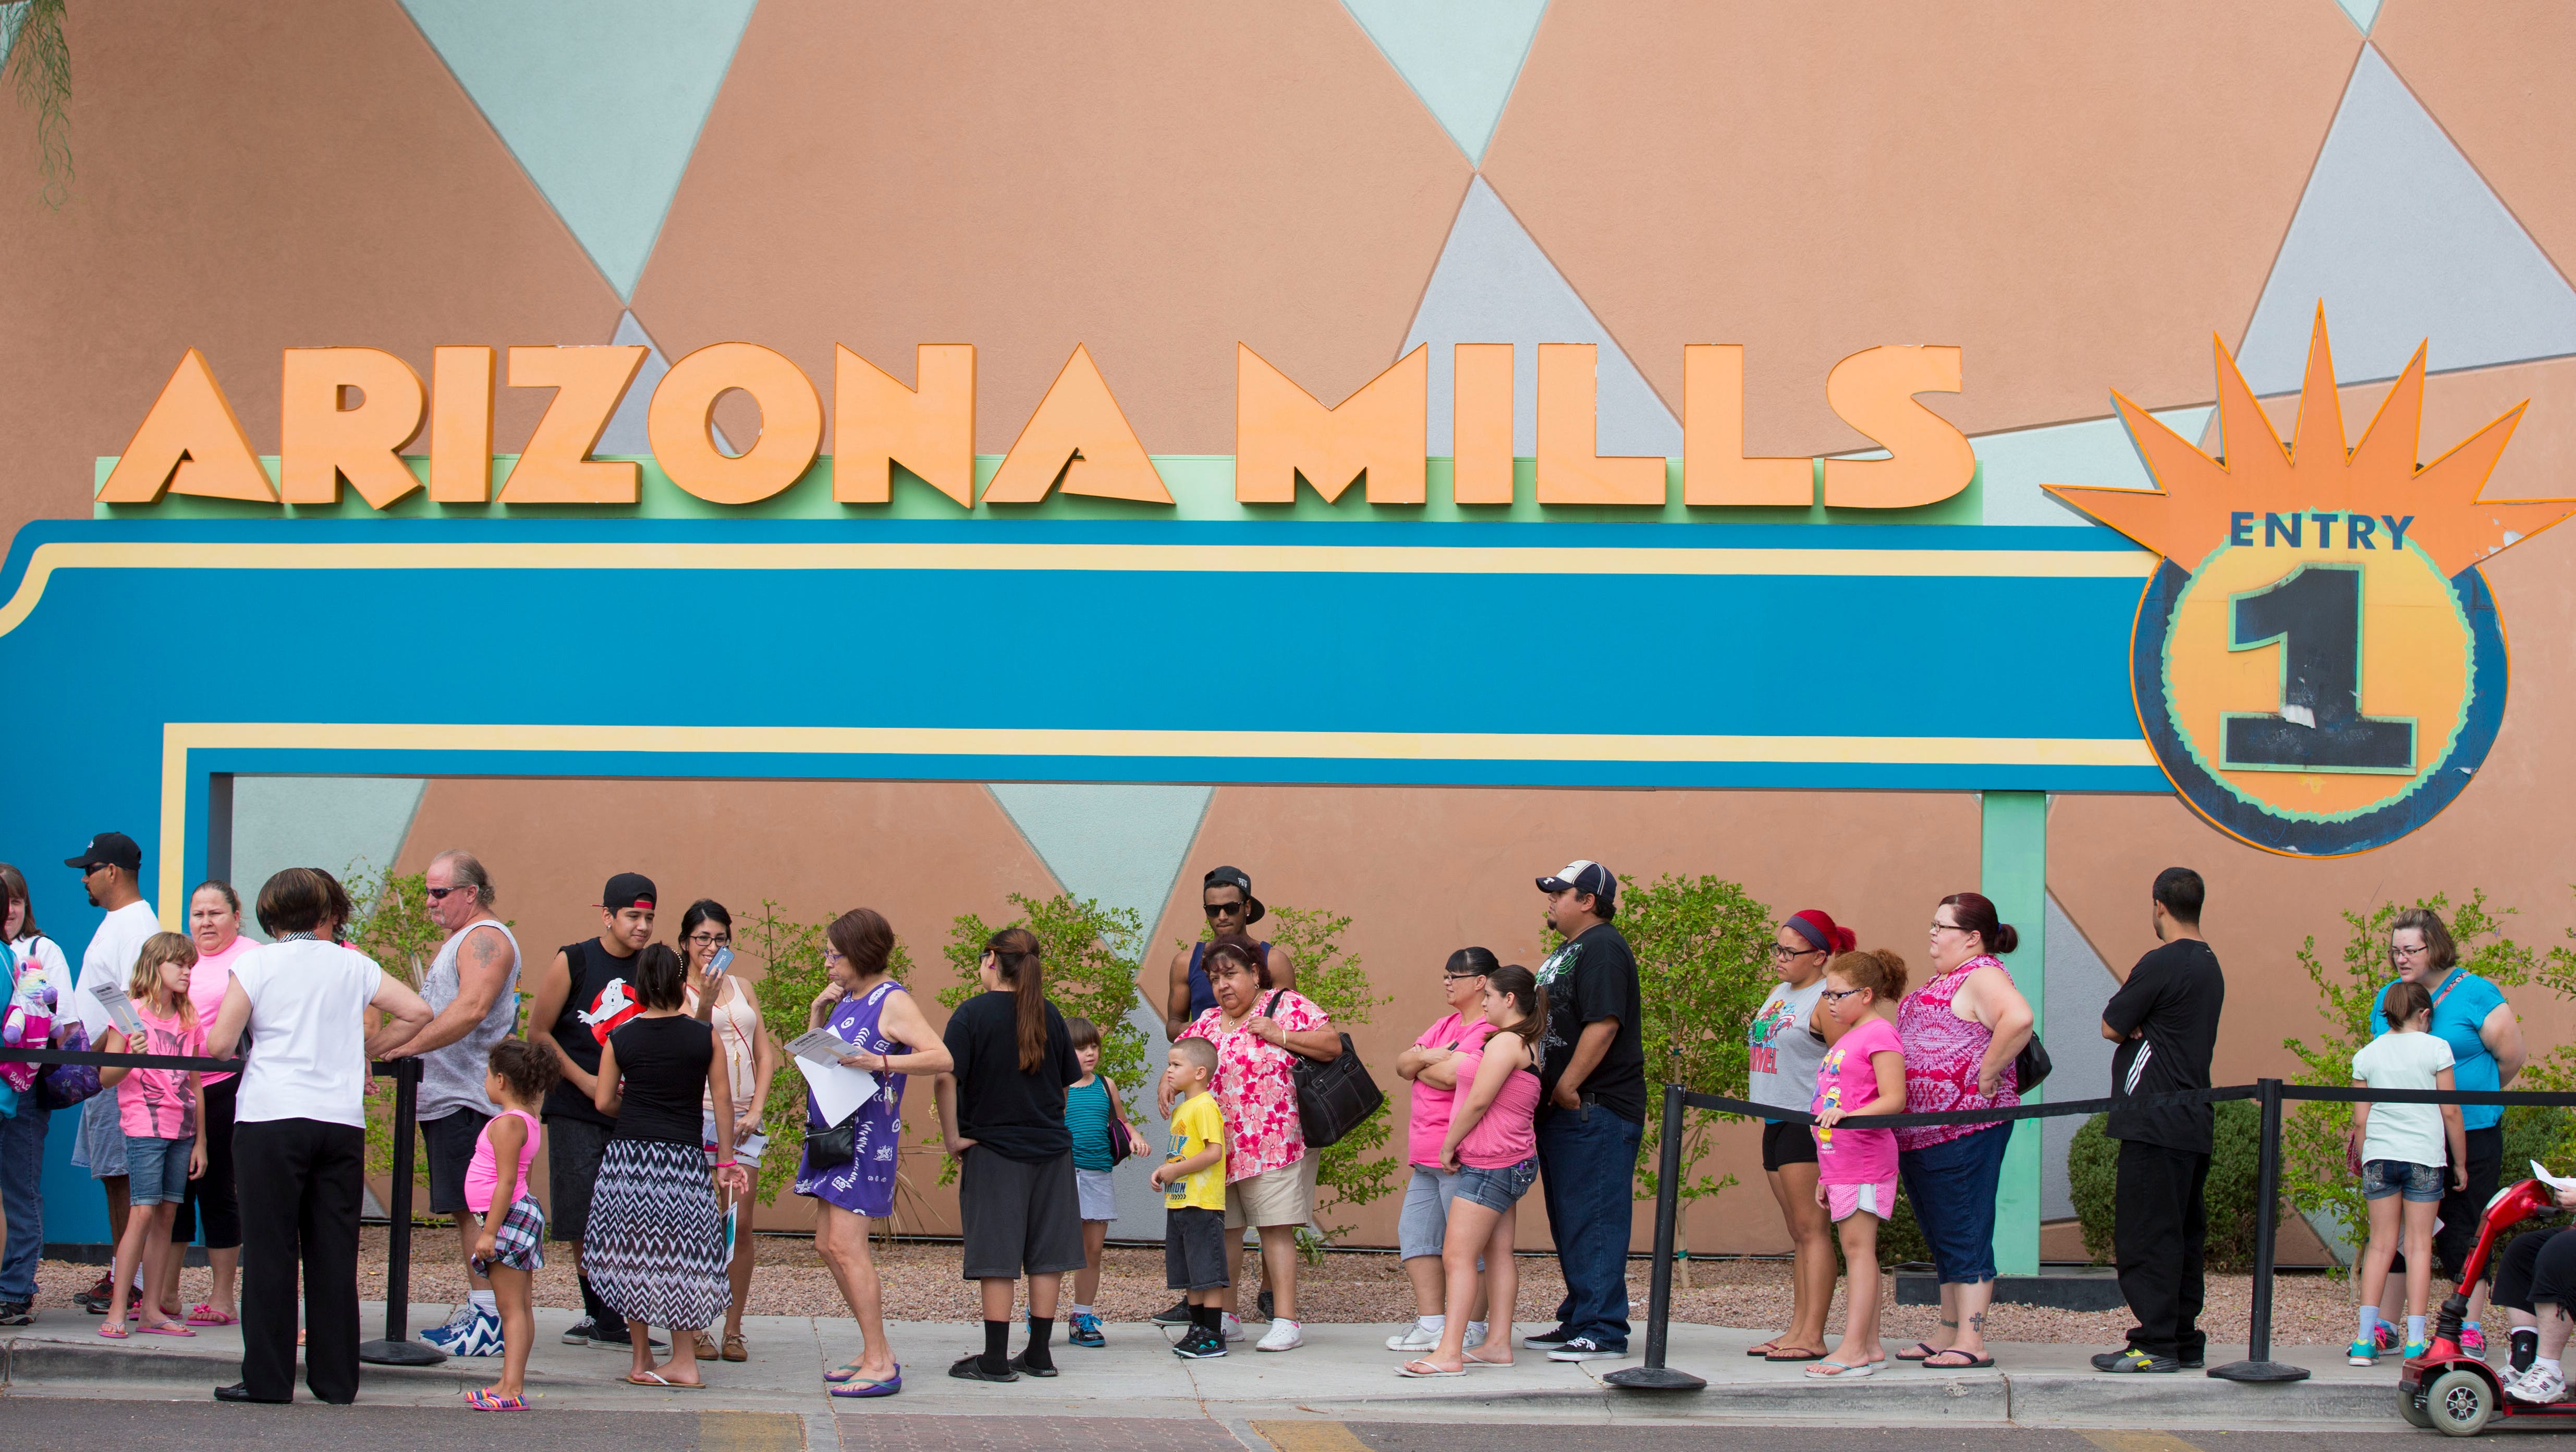 How you can save at Arizona Mills